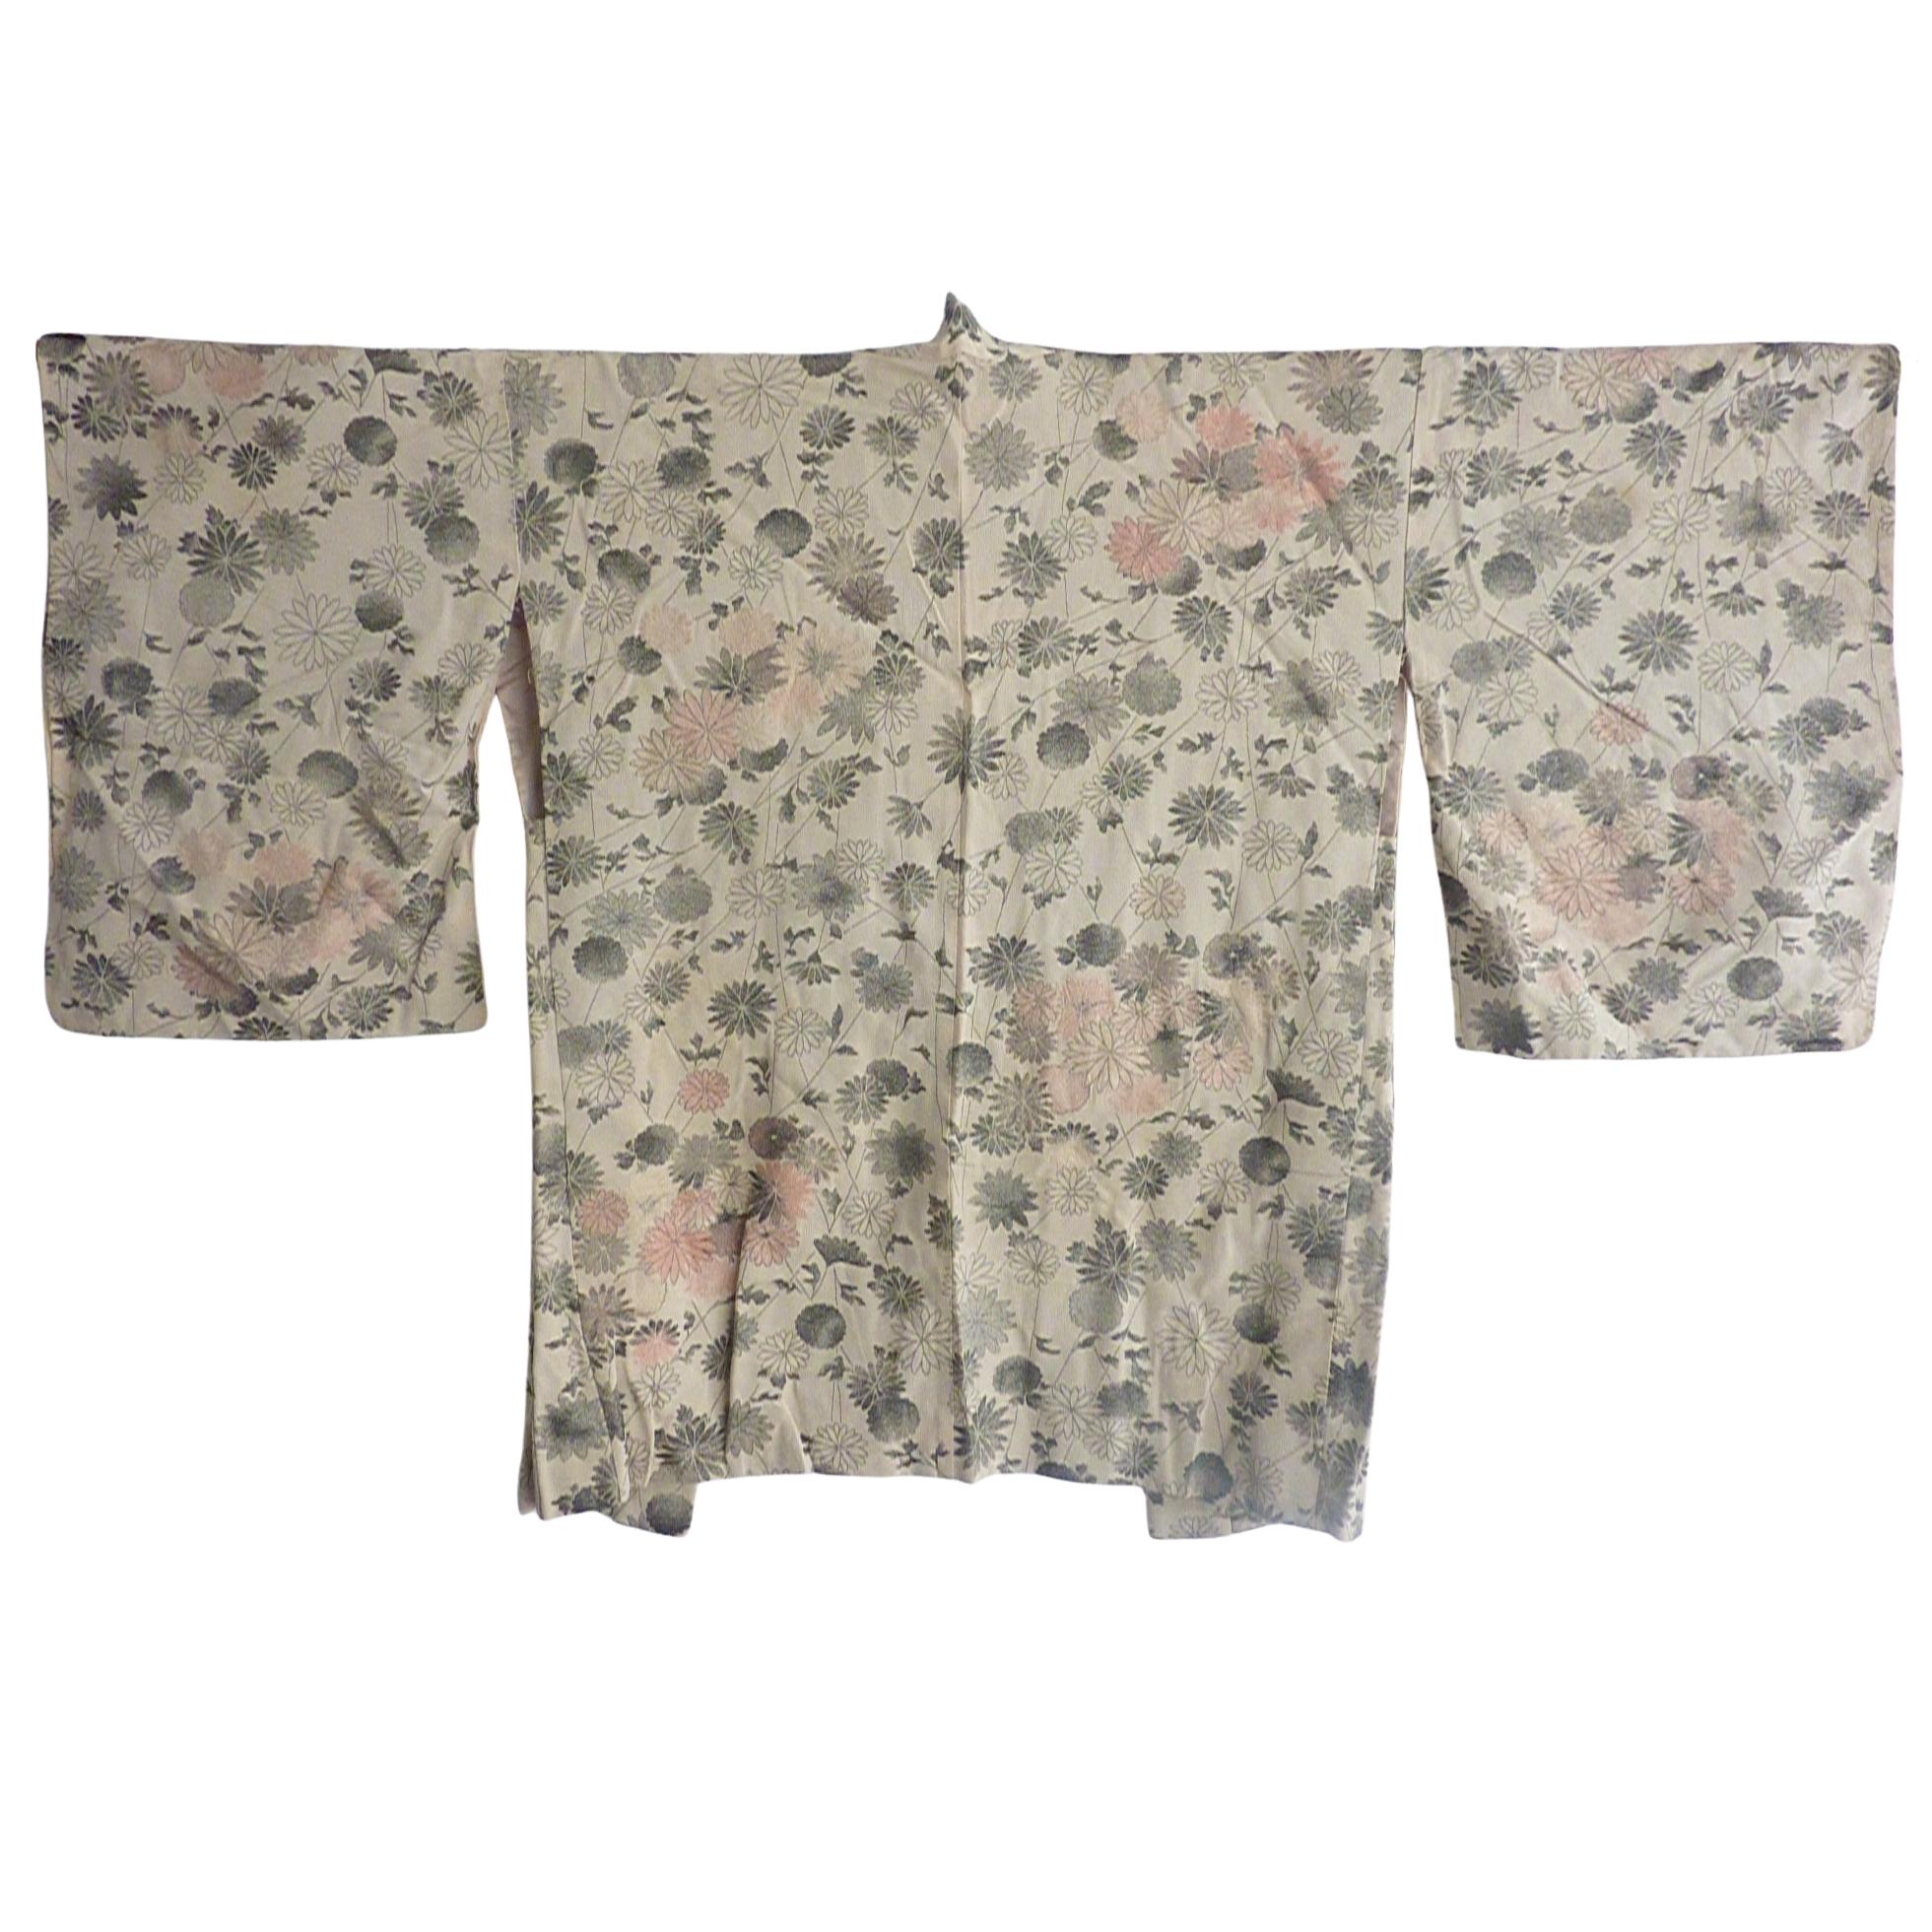 Circa: Meiji
Place of Origin: Japan
Material: Silk brocade with silver threads.
Deep sleeve drops.
Condition: Very good
Some loose threads and age spots. Will leave it to new owner to refresh.
Total length 38